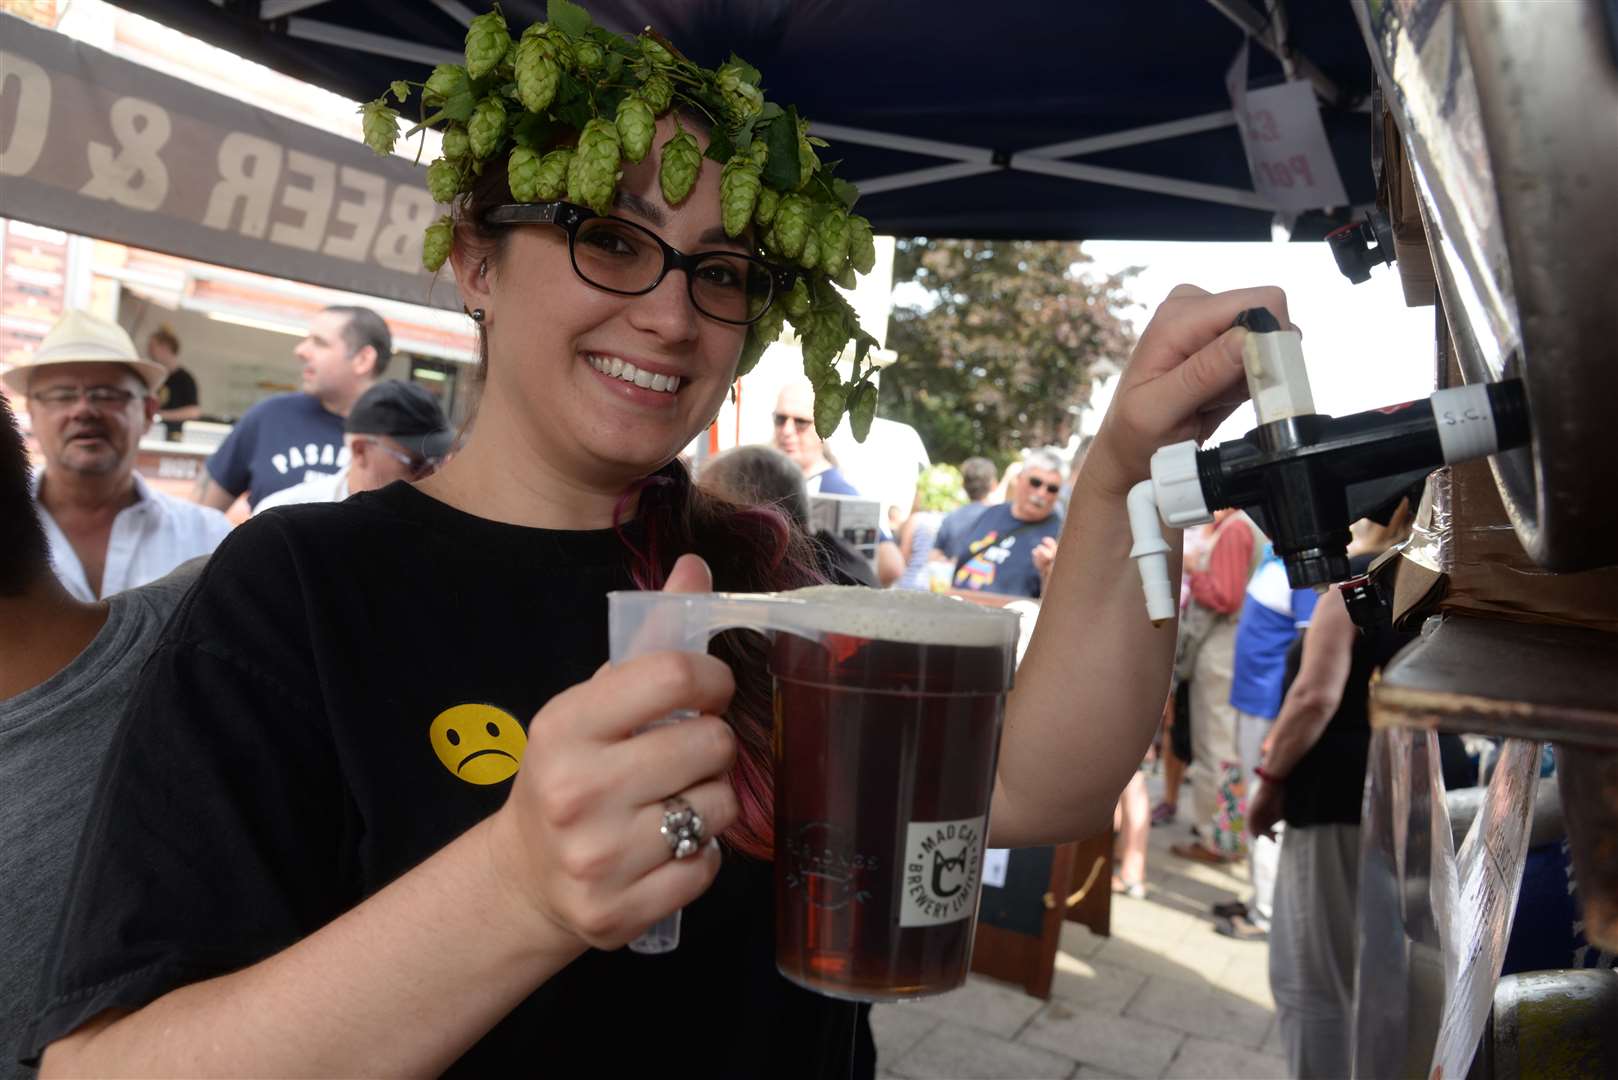 The CAMRA bar is a regular at Hop Festival and is just one of many pop-up bars throughout the town. Picture: Chris Davey